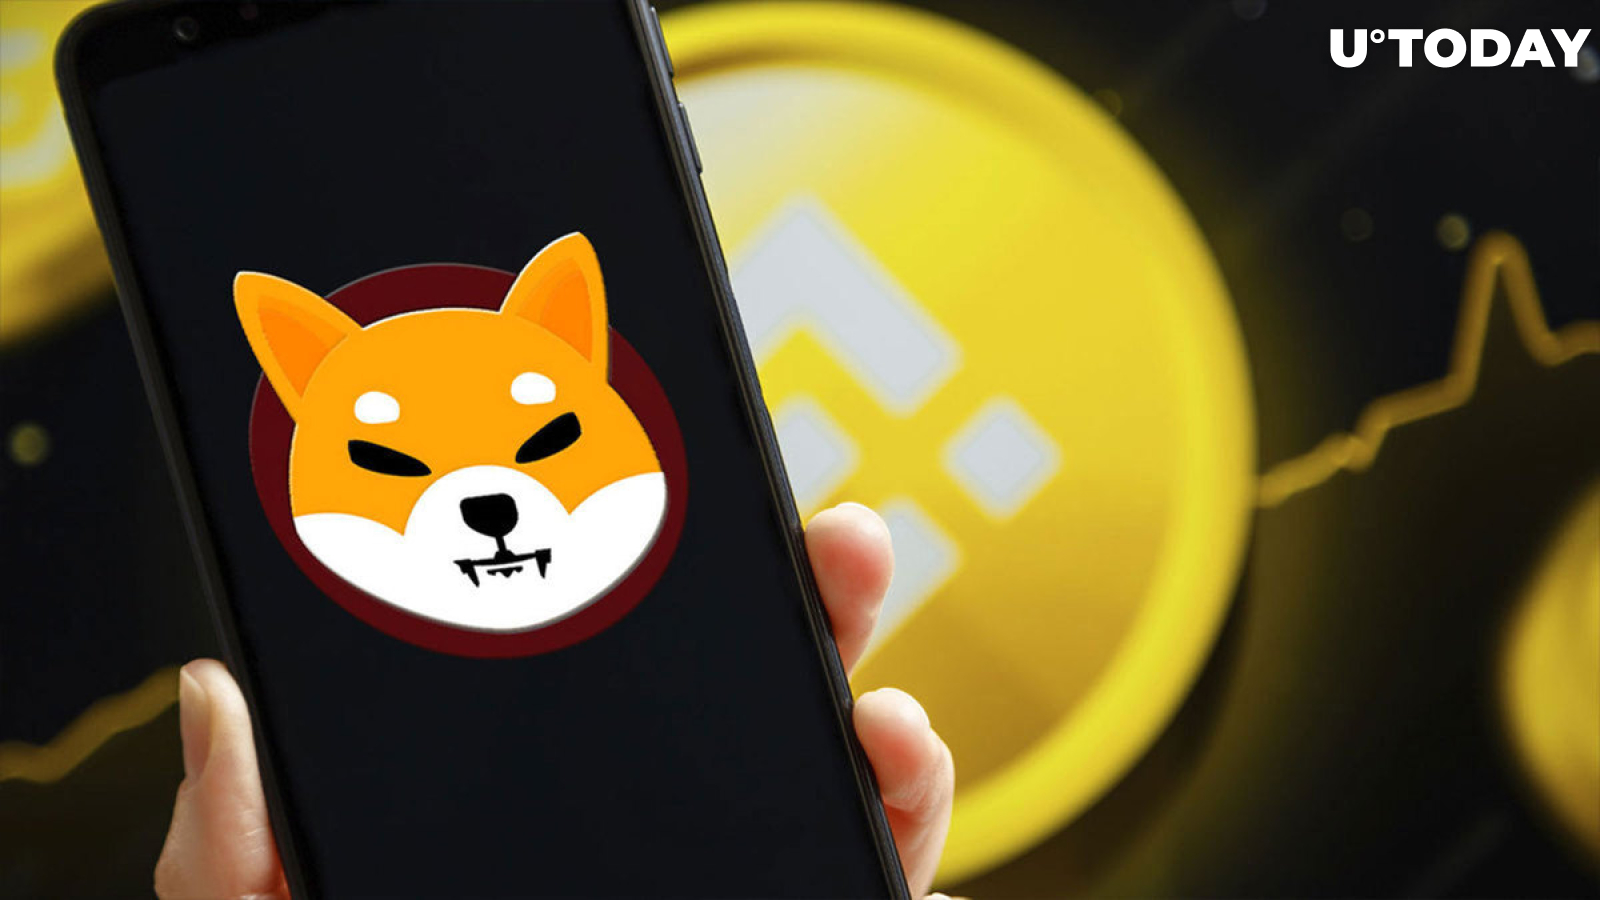 17.8 Billion SHIB Transferred to Binance and Other Wallets Just Now